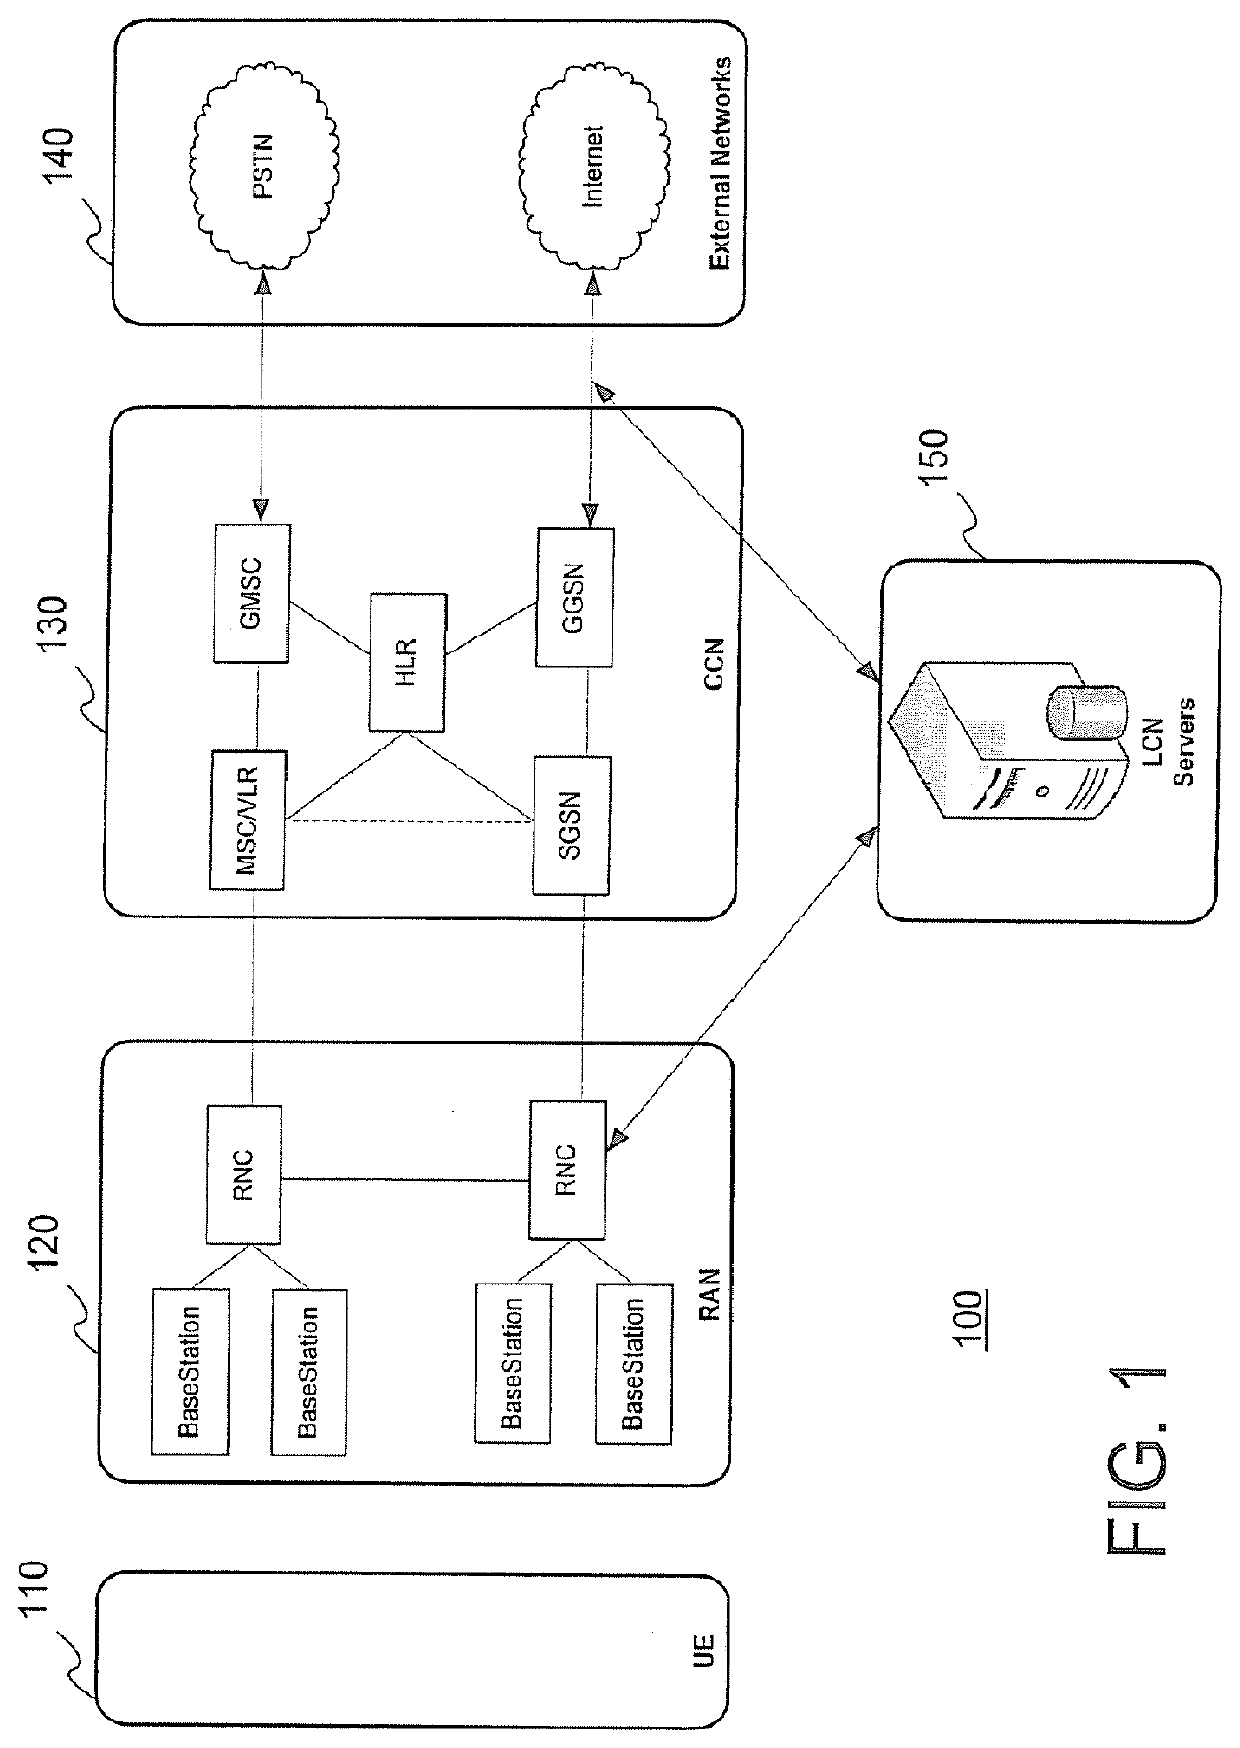 Method and System for Efficient Communication